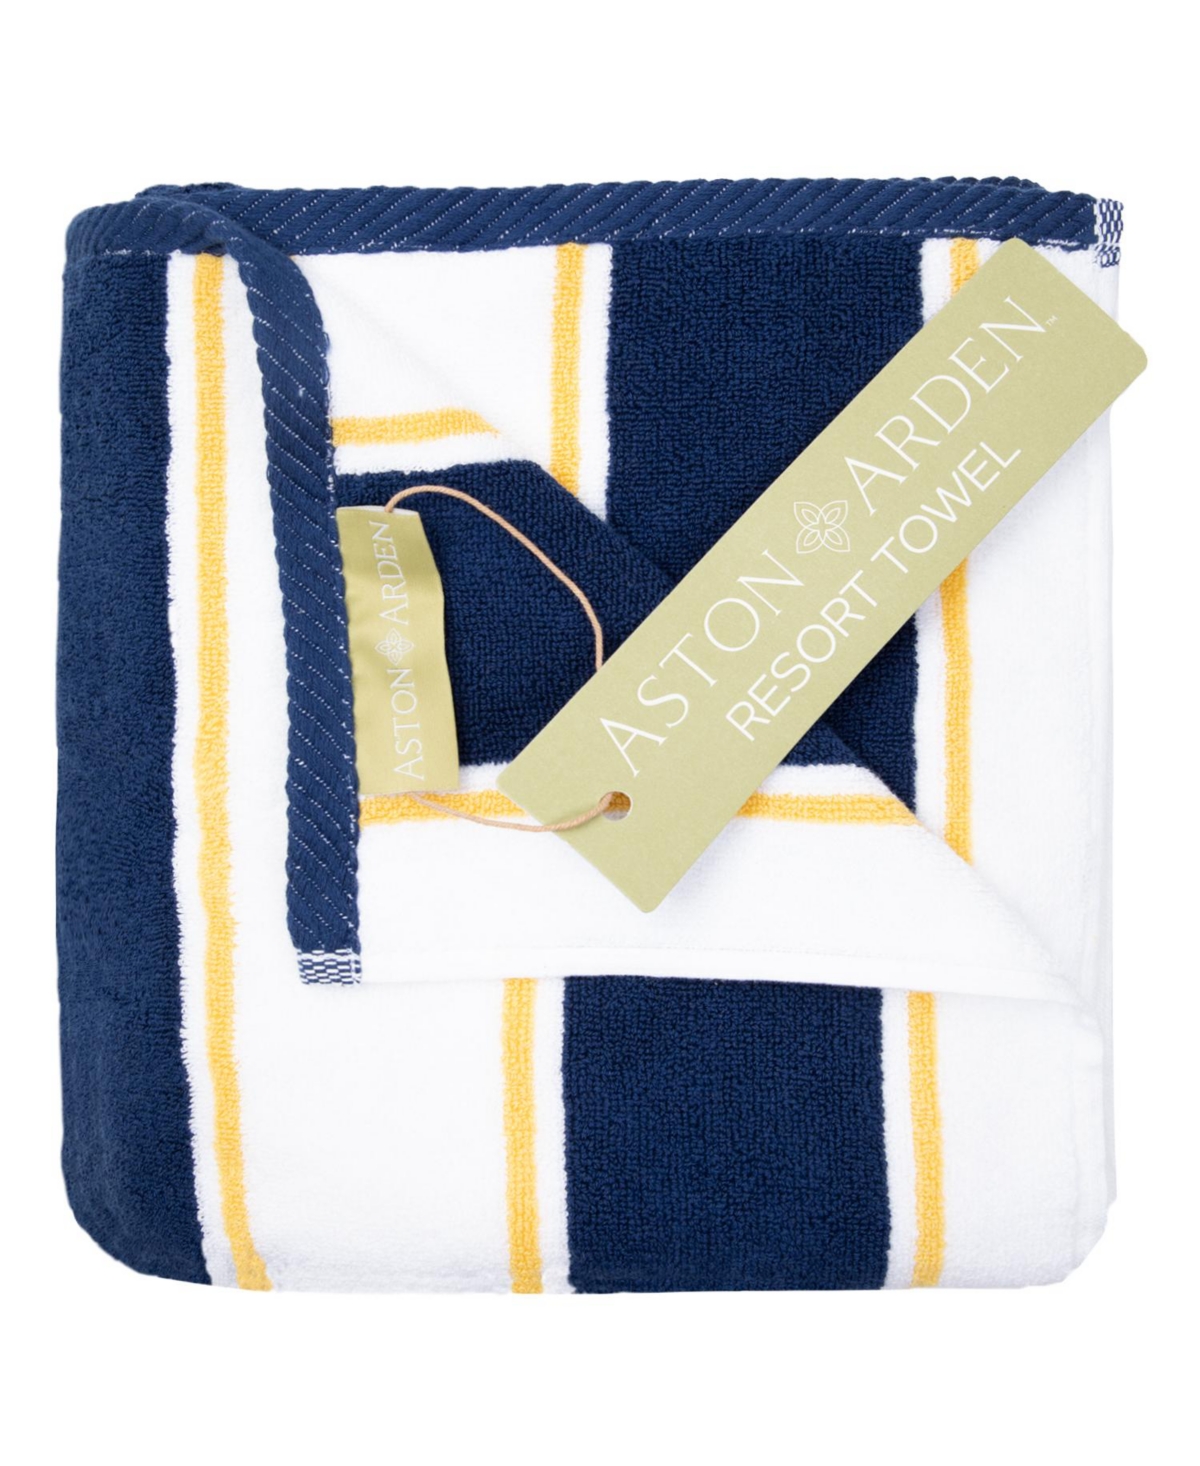 Aston And Arden Oversized Extra Thick Luxury Beach Towel (35x70 In., 600 Gsm), Pinstriped, Soft Ring Spun Cotton Res In Navy/yellow